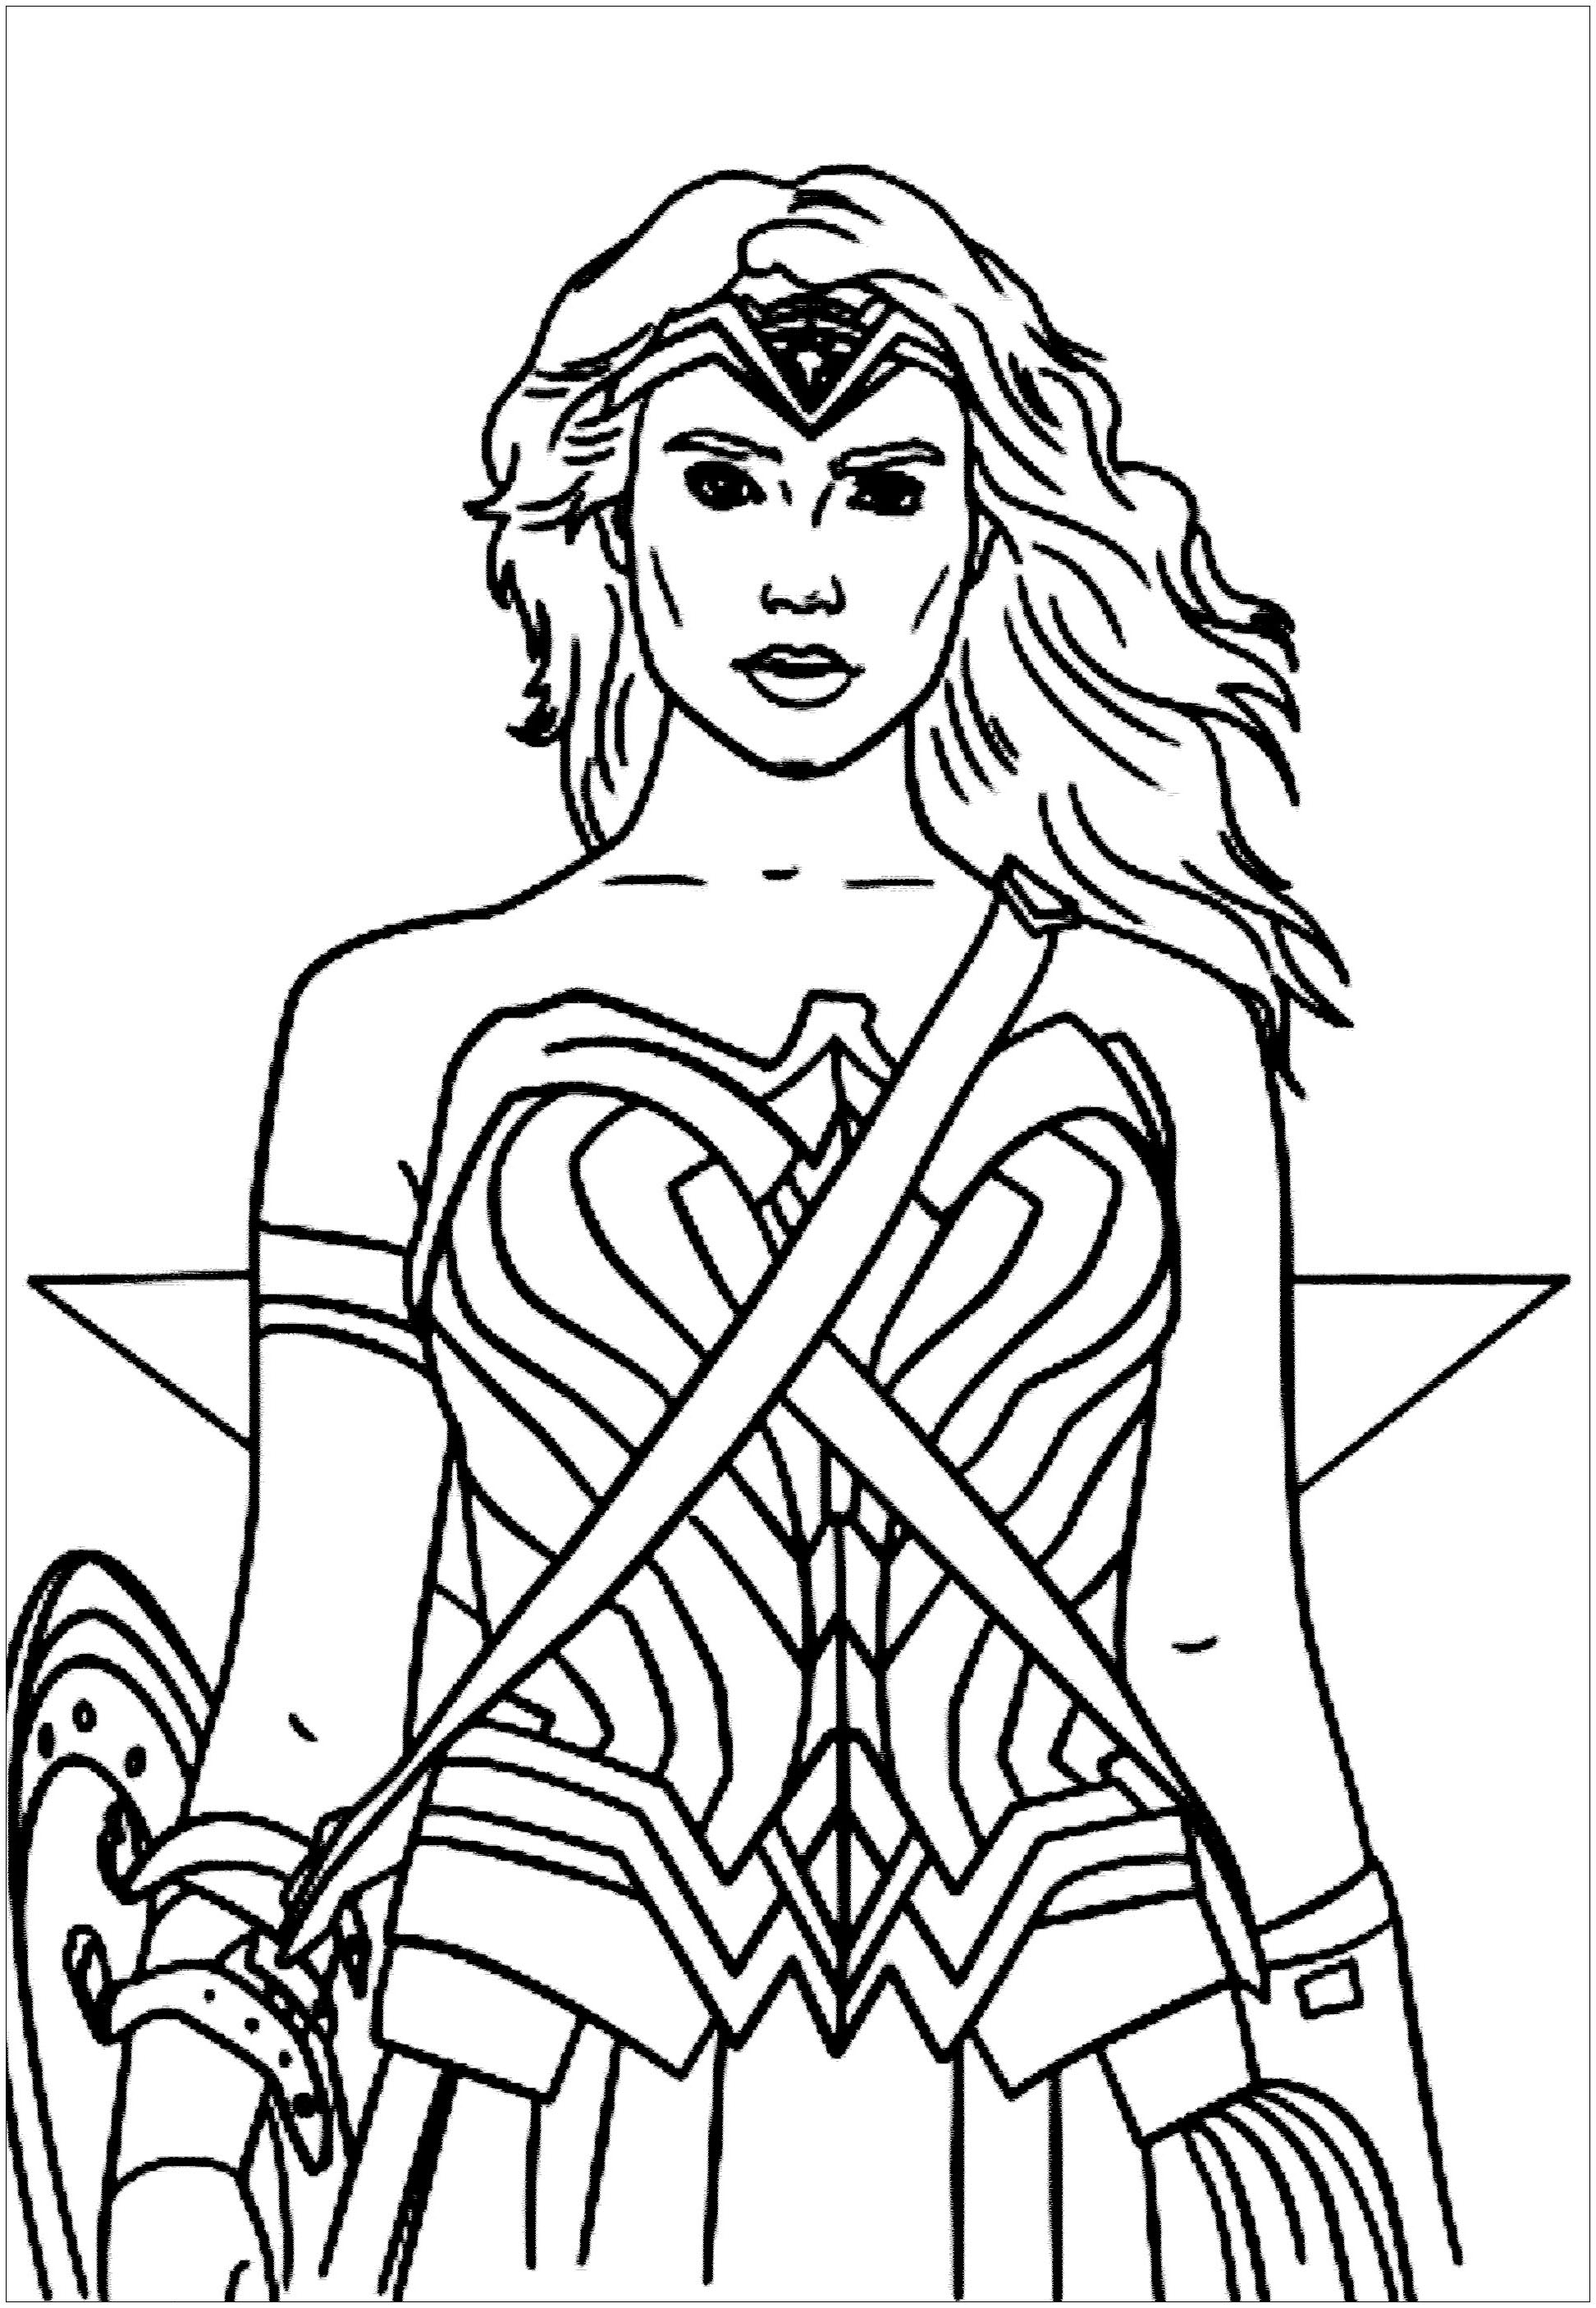 728 Cartoon Wonder Woman Printable Coloring Pages with Animal character